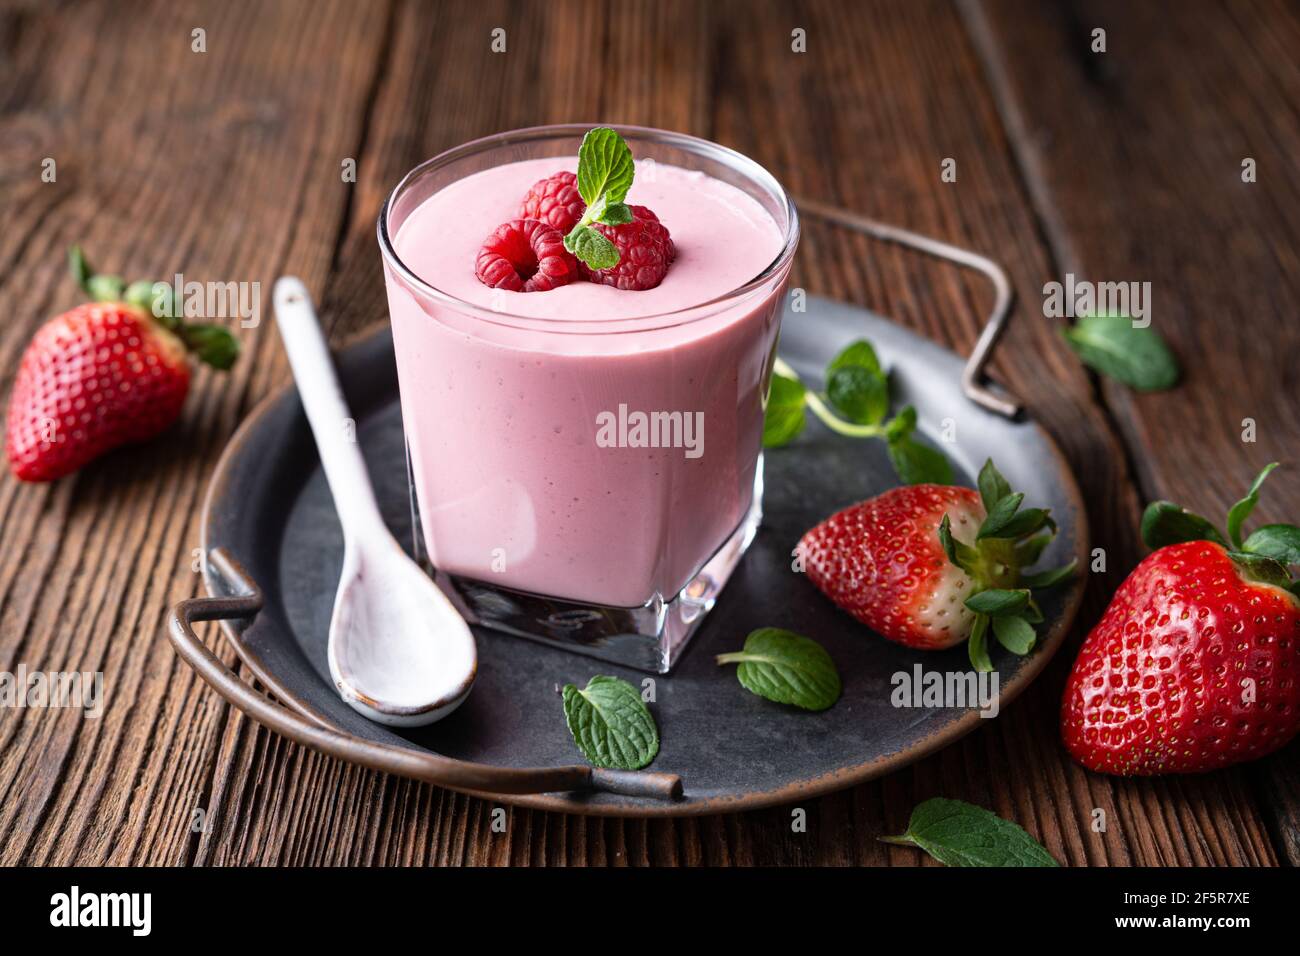 Healthy drink, strawberry and raspberry smoothie with Greek yogurt in a glass jar on rustic wooden background Stock Photo